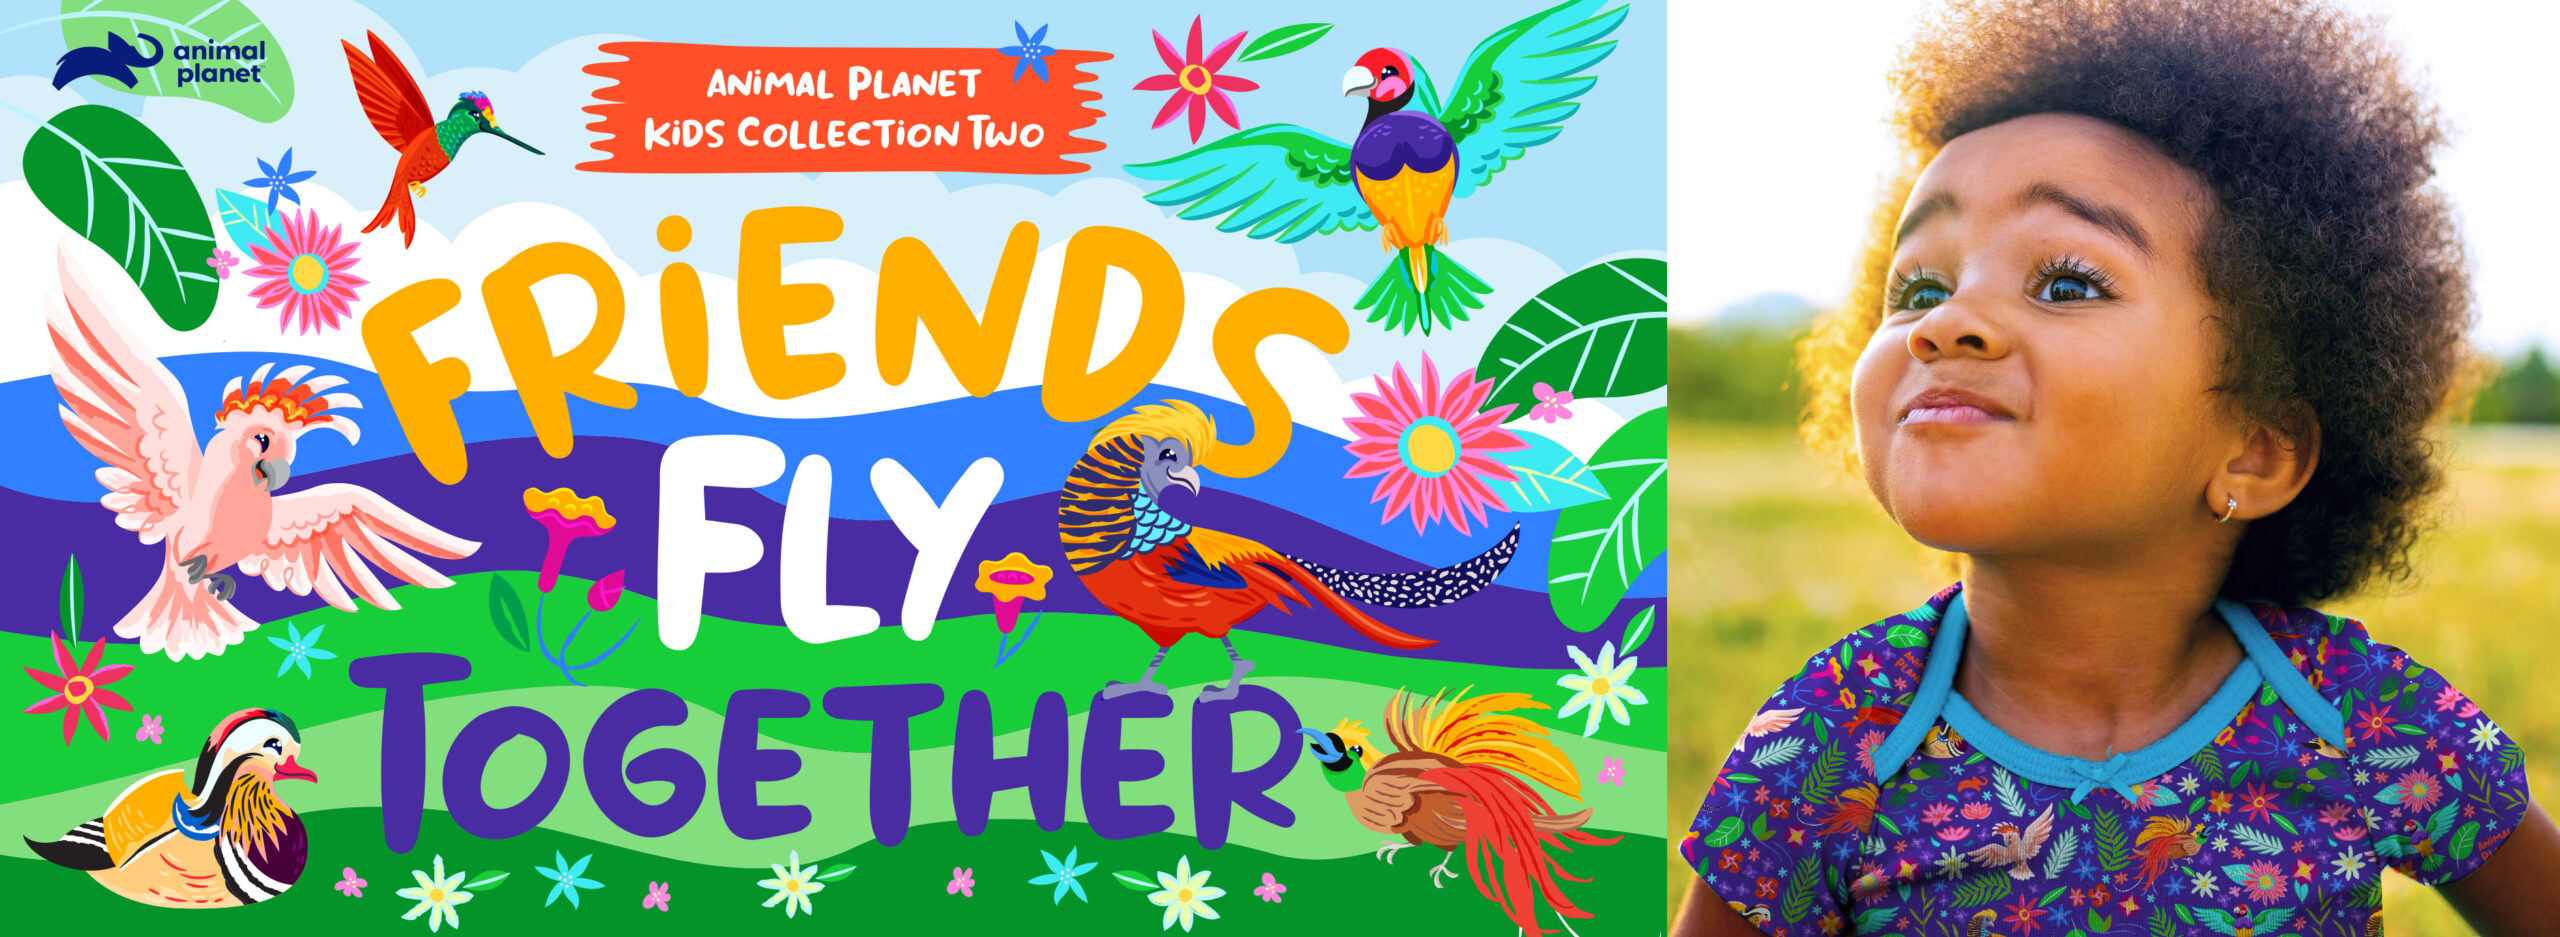 Cover image for Animal Planet Kids Collection Two: Friends Fly Together, featuring character art.